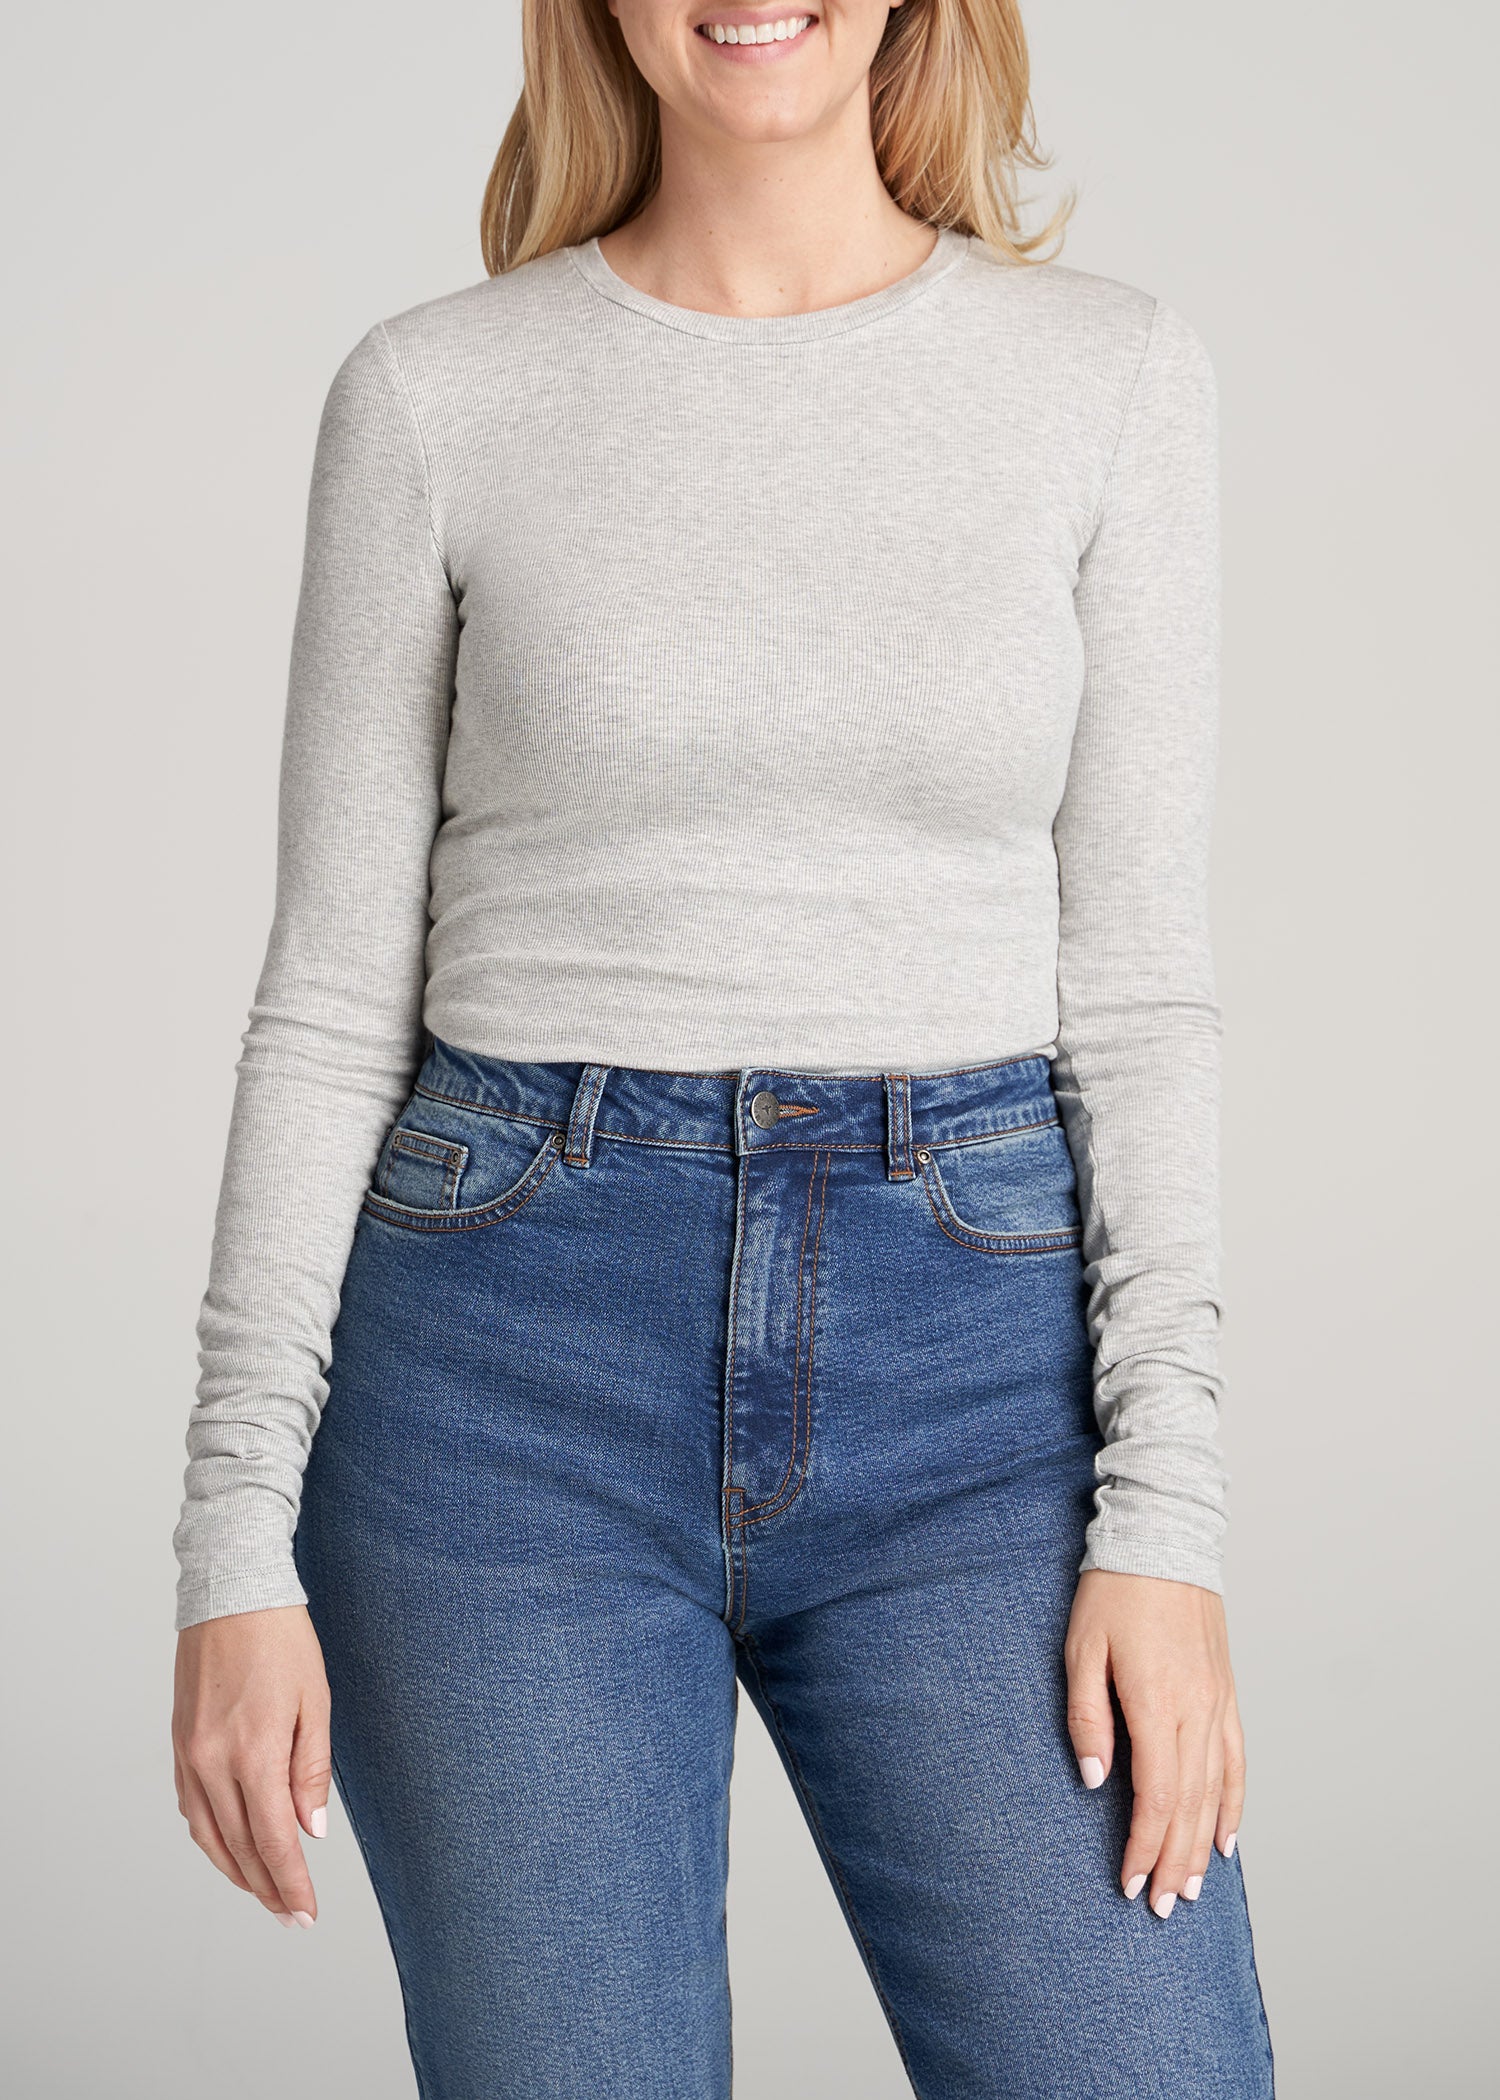    American-Tall-Women-Ribbed-LongSleeve-Tee-GreyMix-front